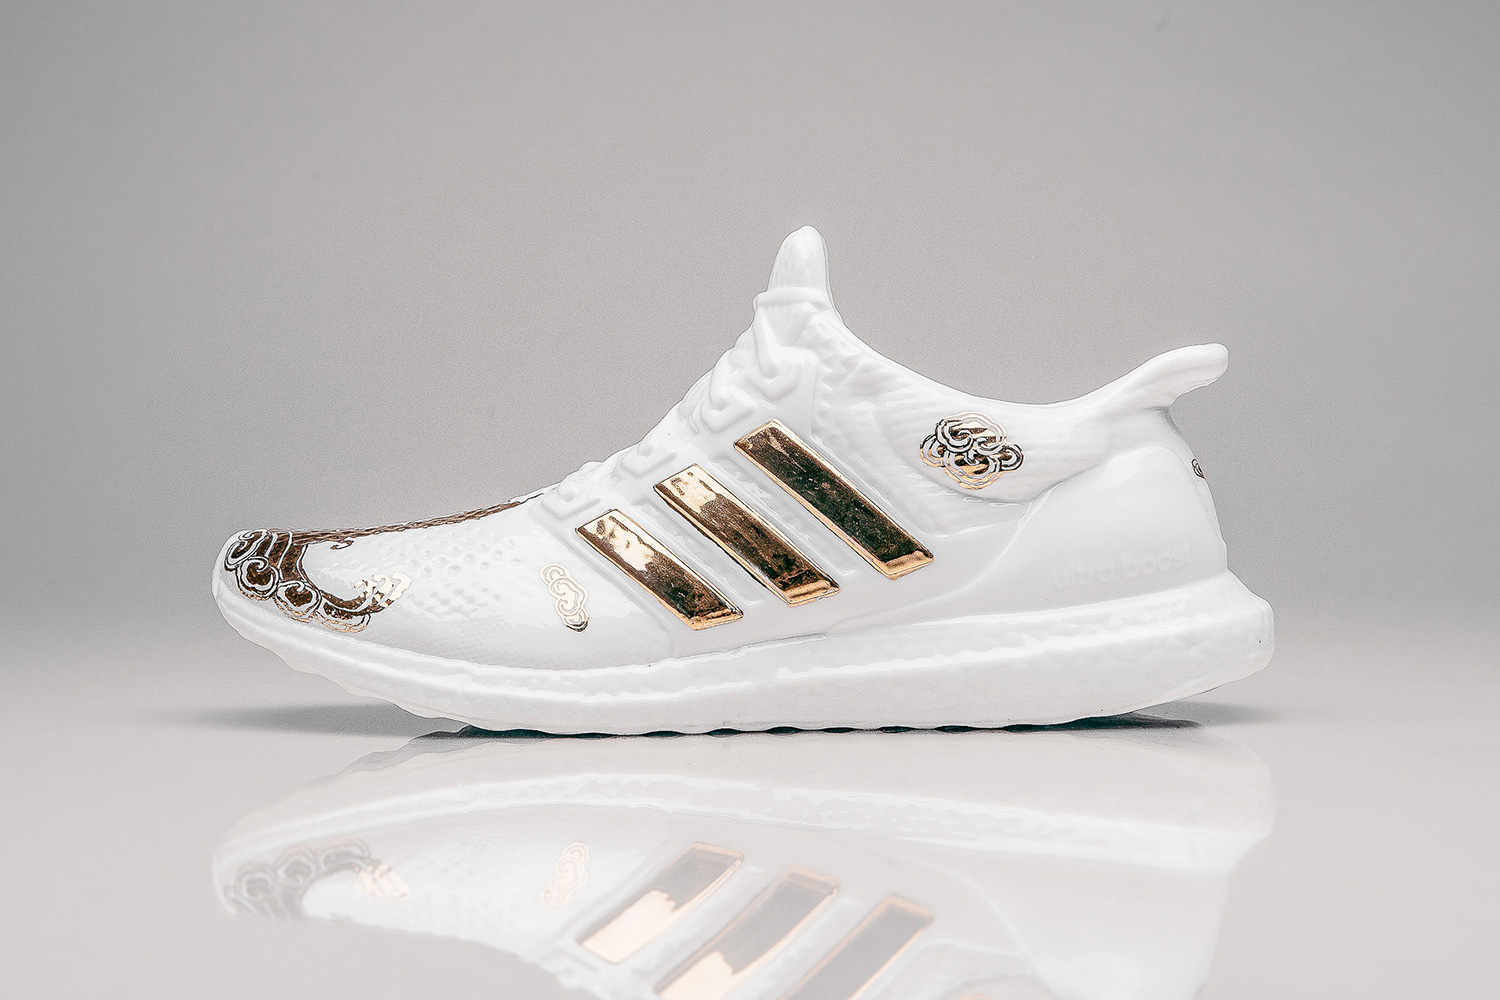 adidas boost white and gold